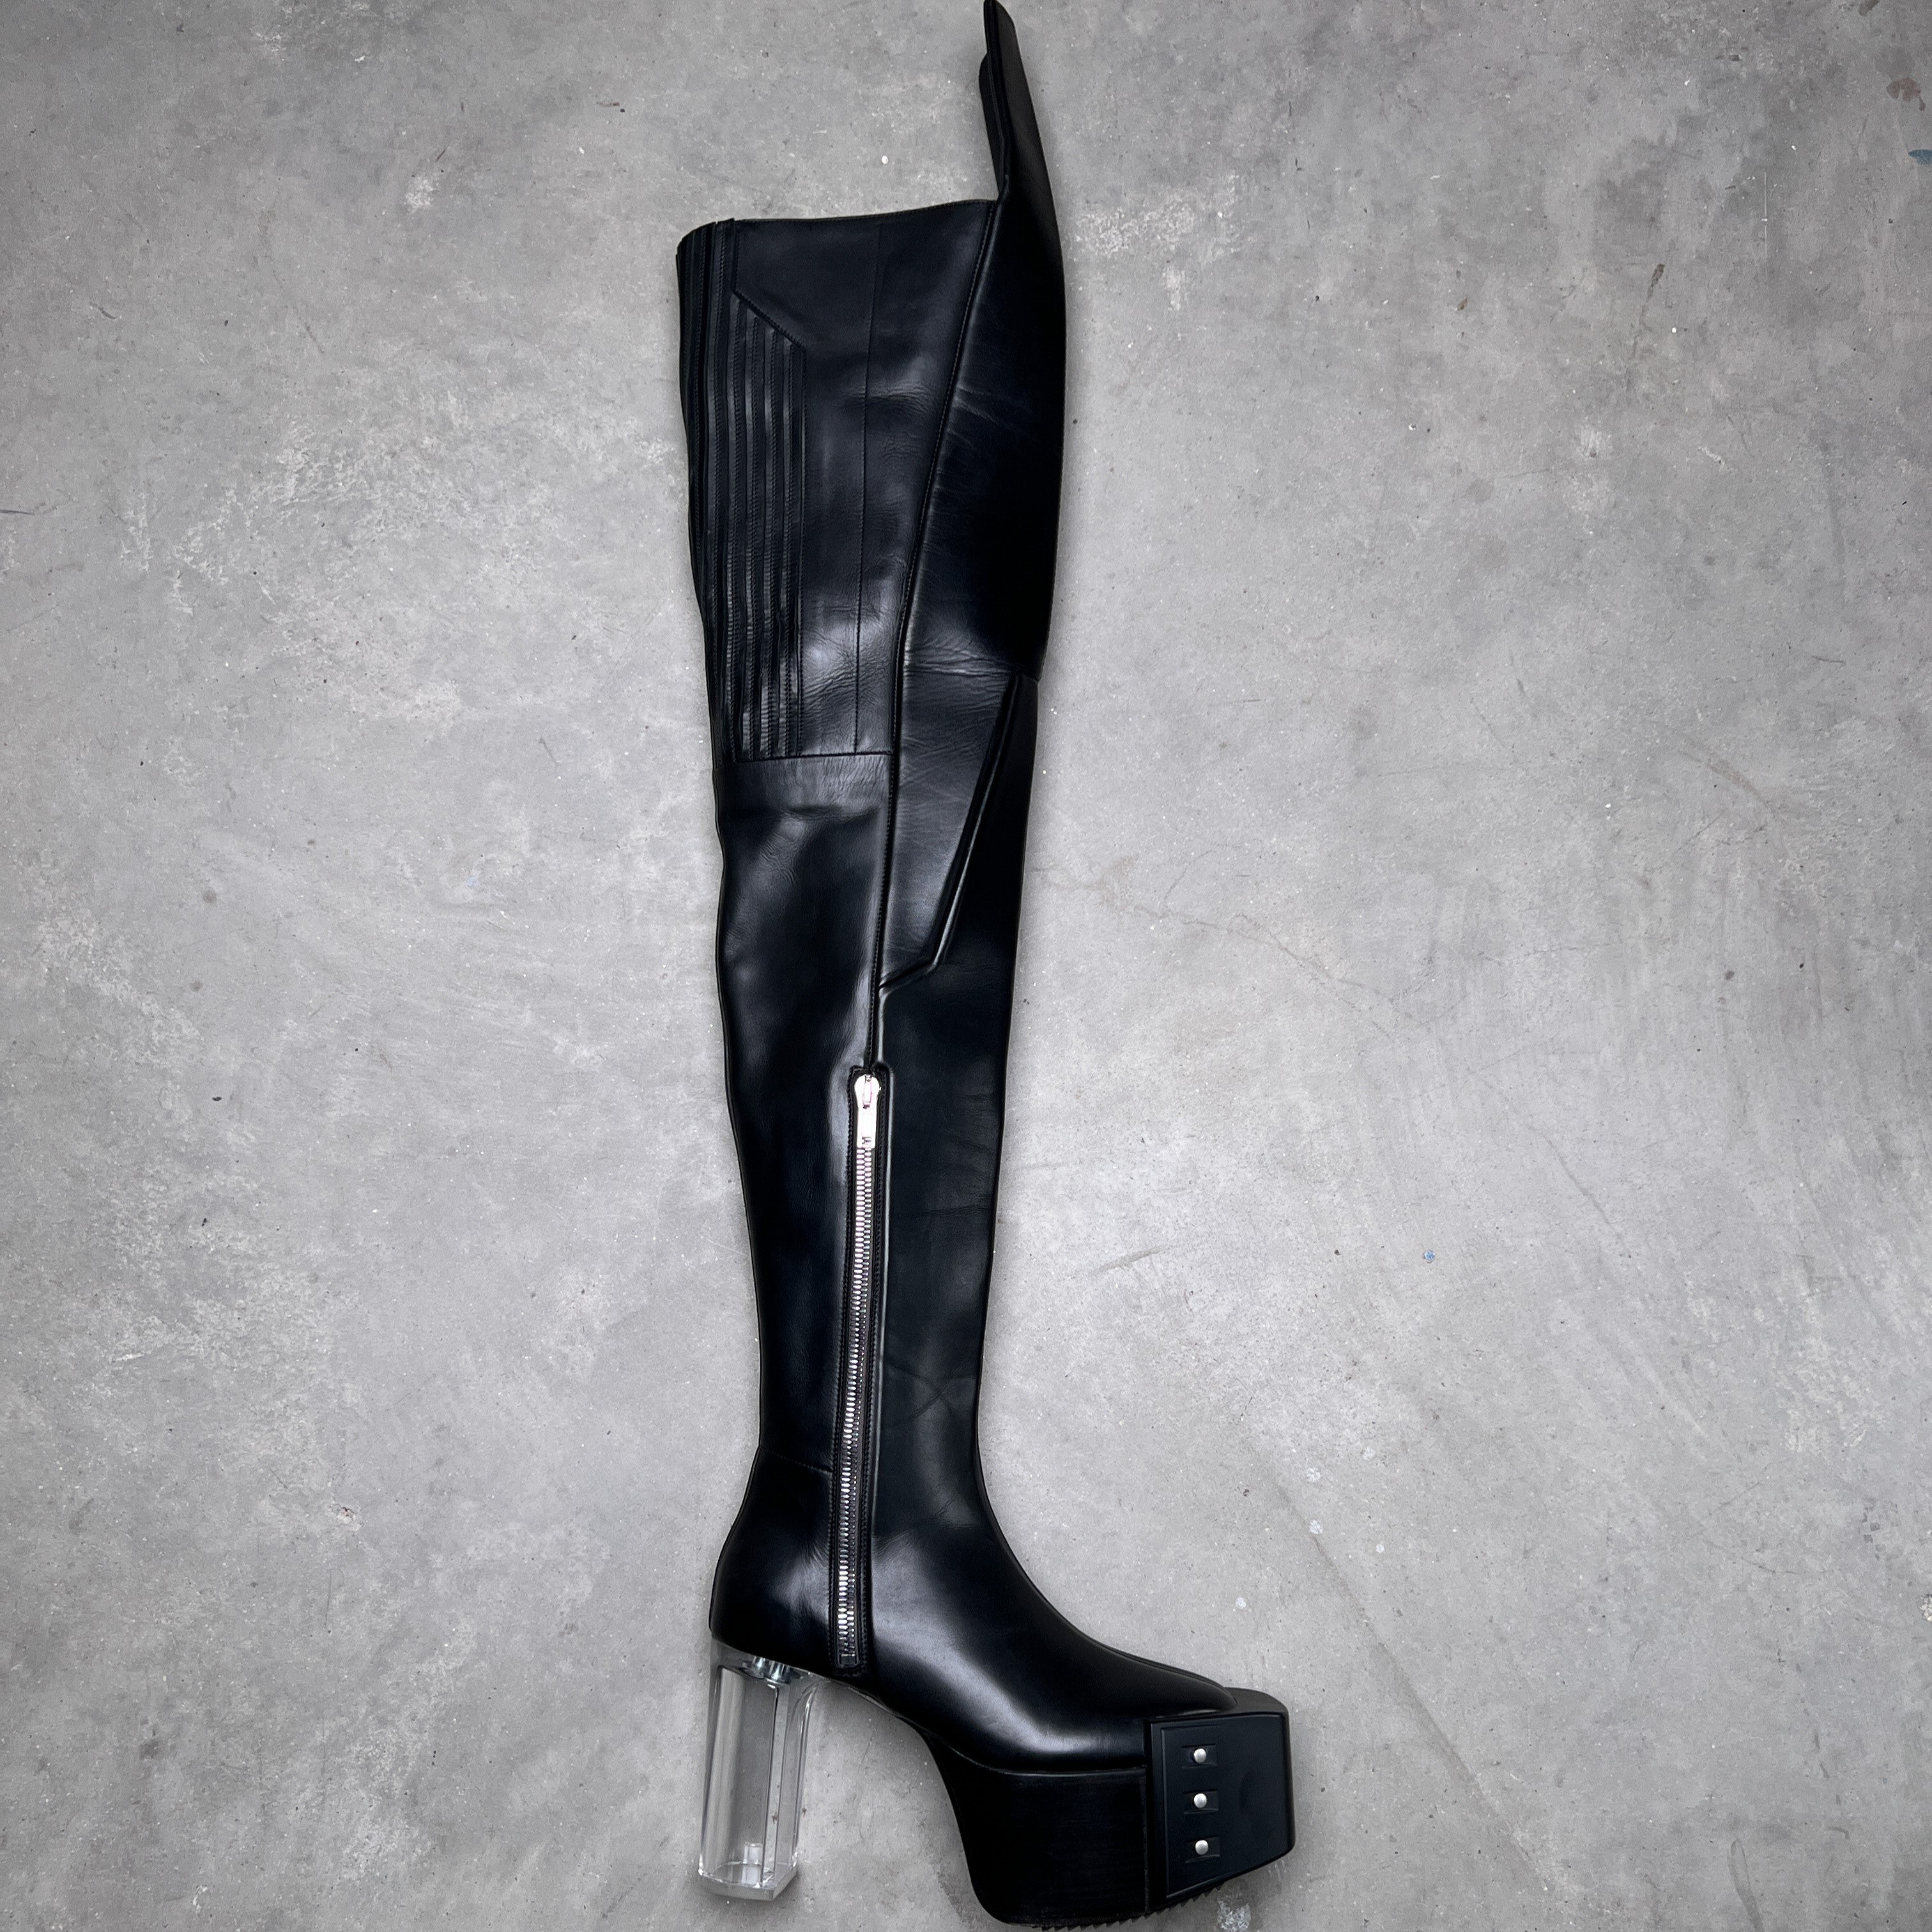 Rick Owens FW21 GETHSEMANE Thigh High Waders Kiss Boots – ARCHIVE A